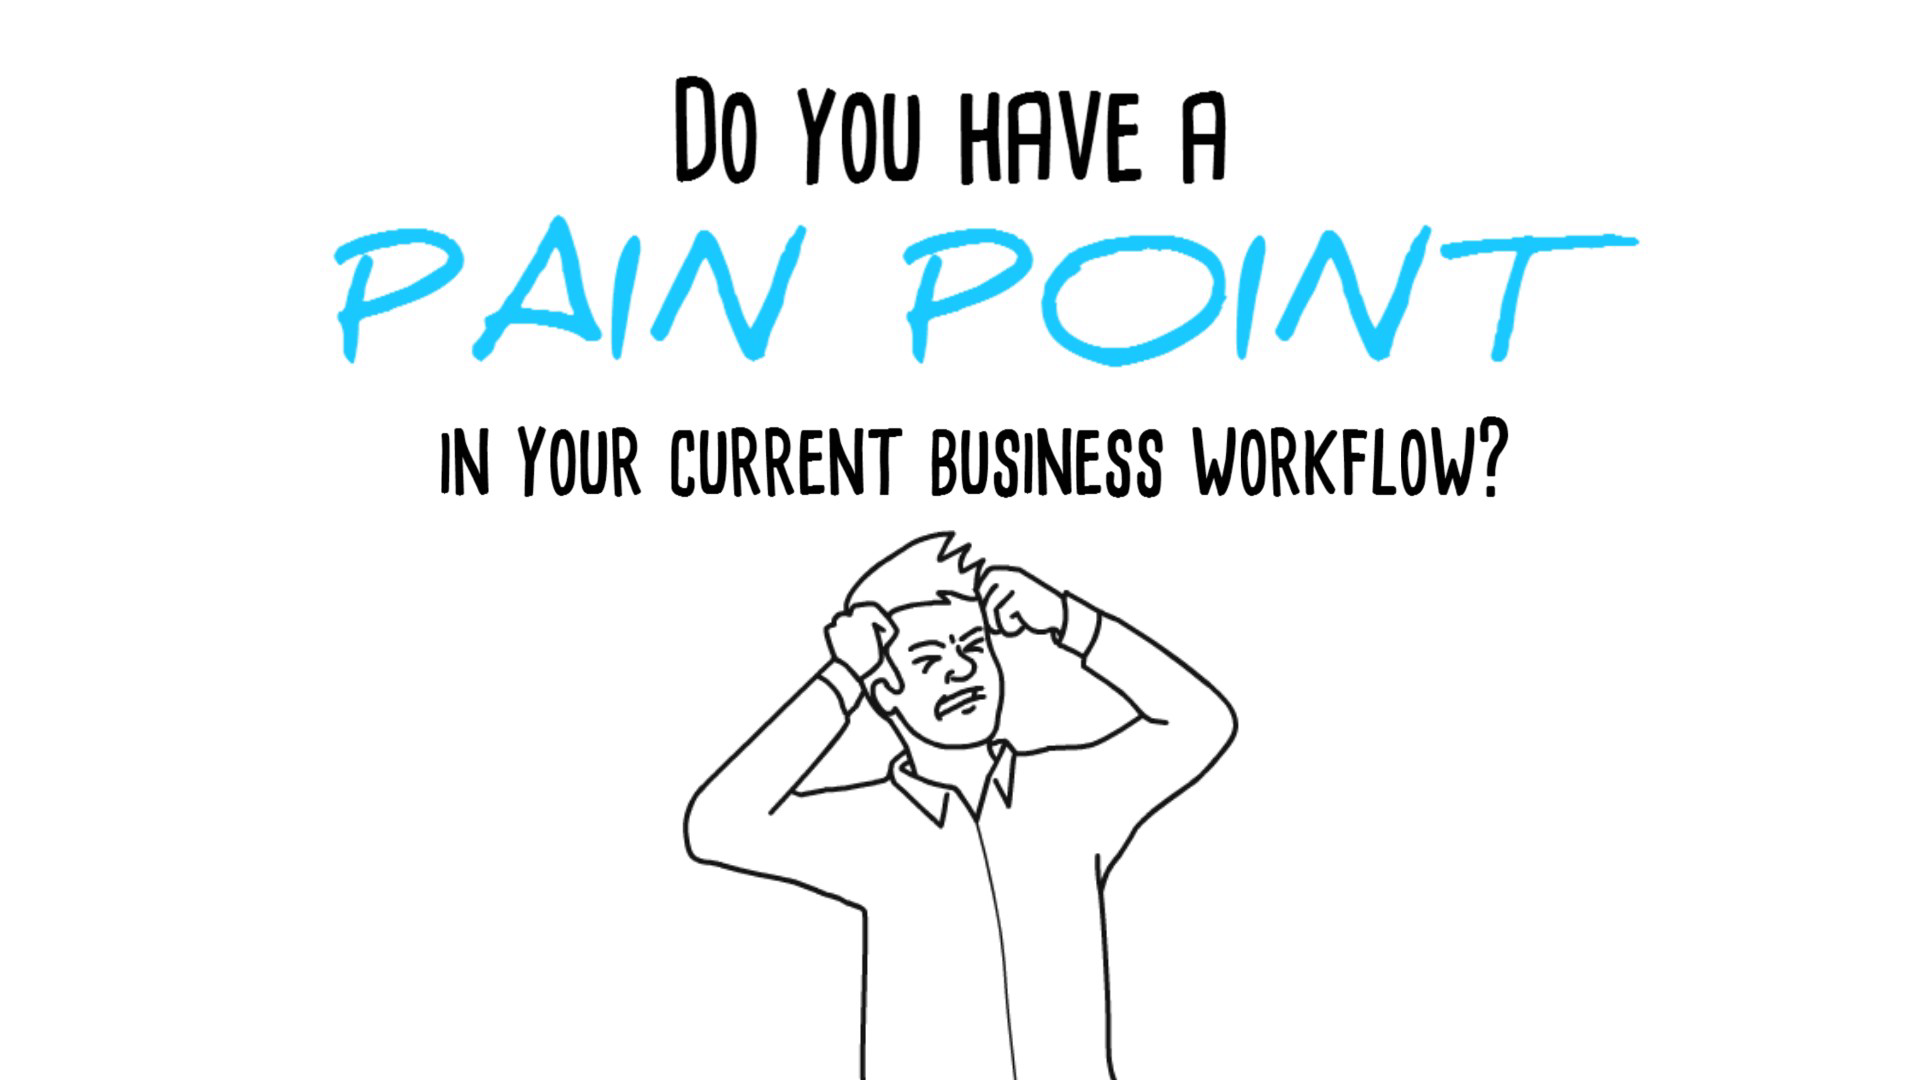 Do you have a pain point in your current business workflow?